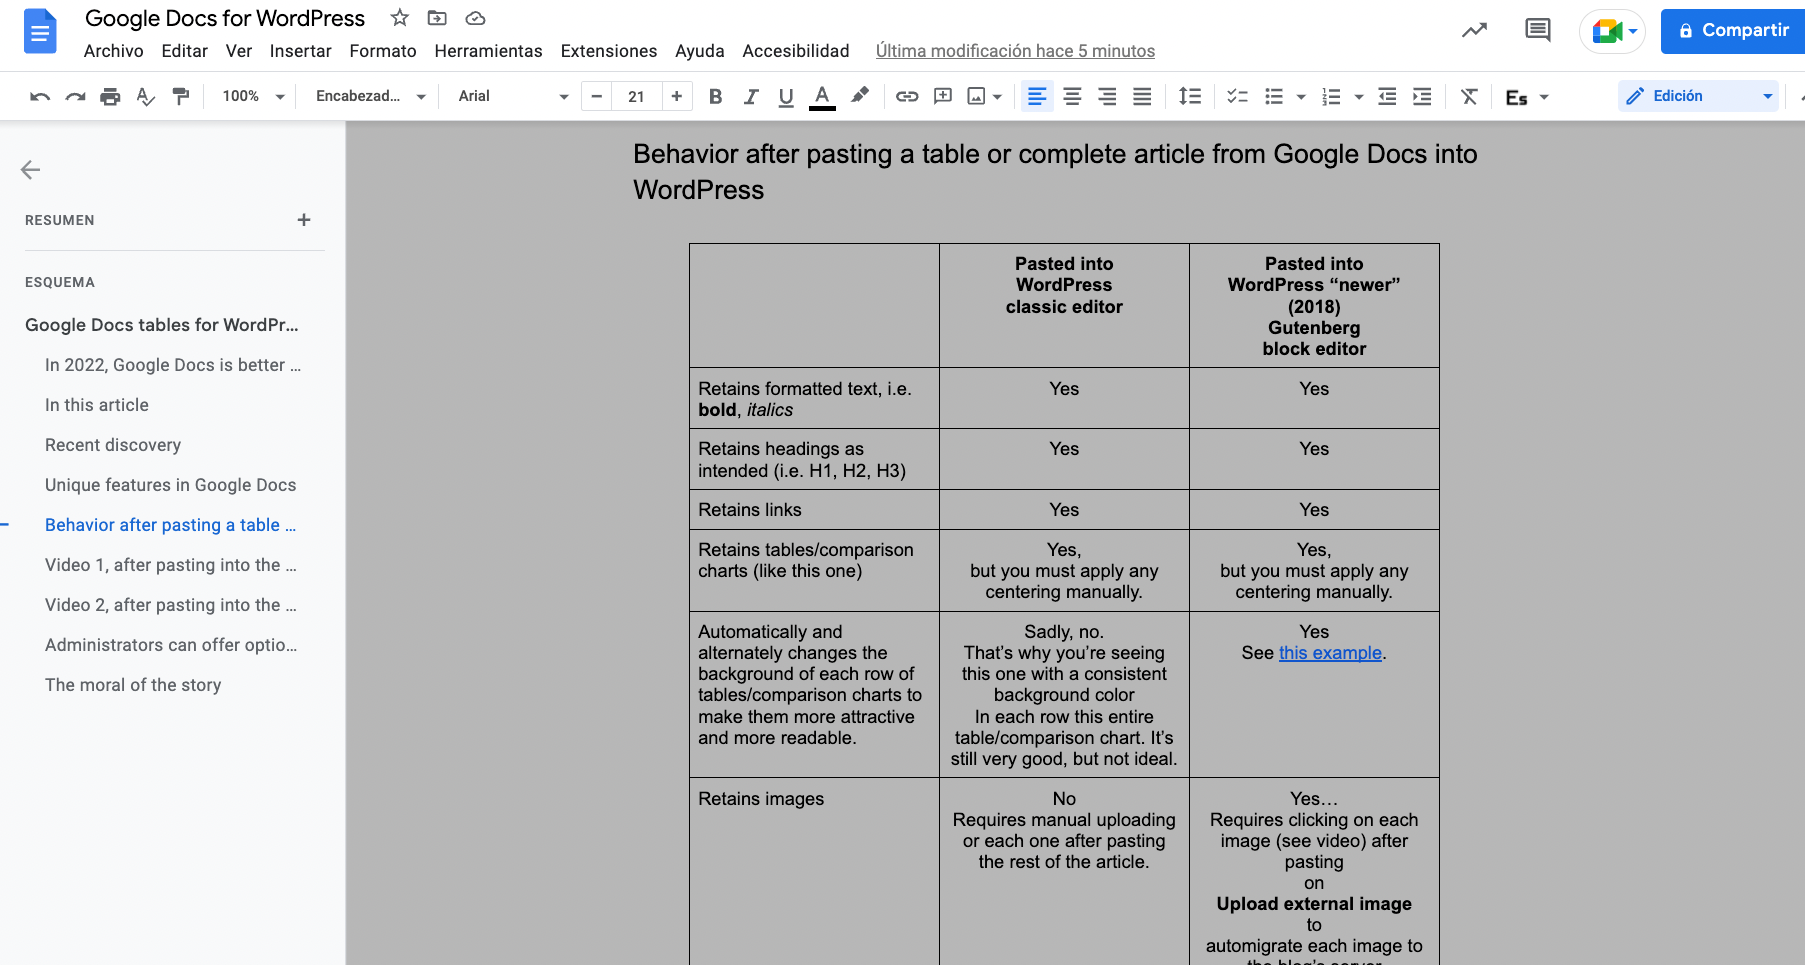 Google Docs tables for WordPress (and more) in 2022 8